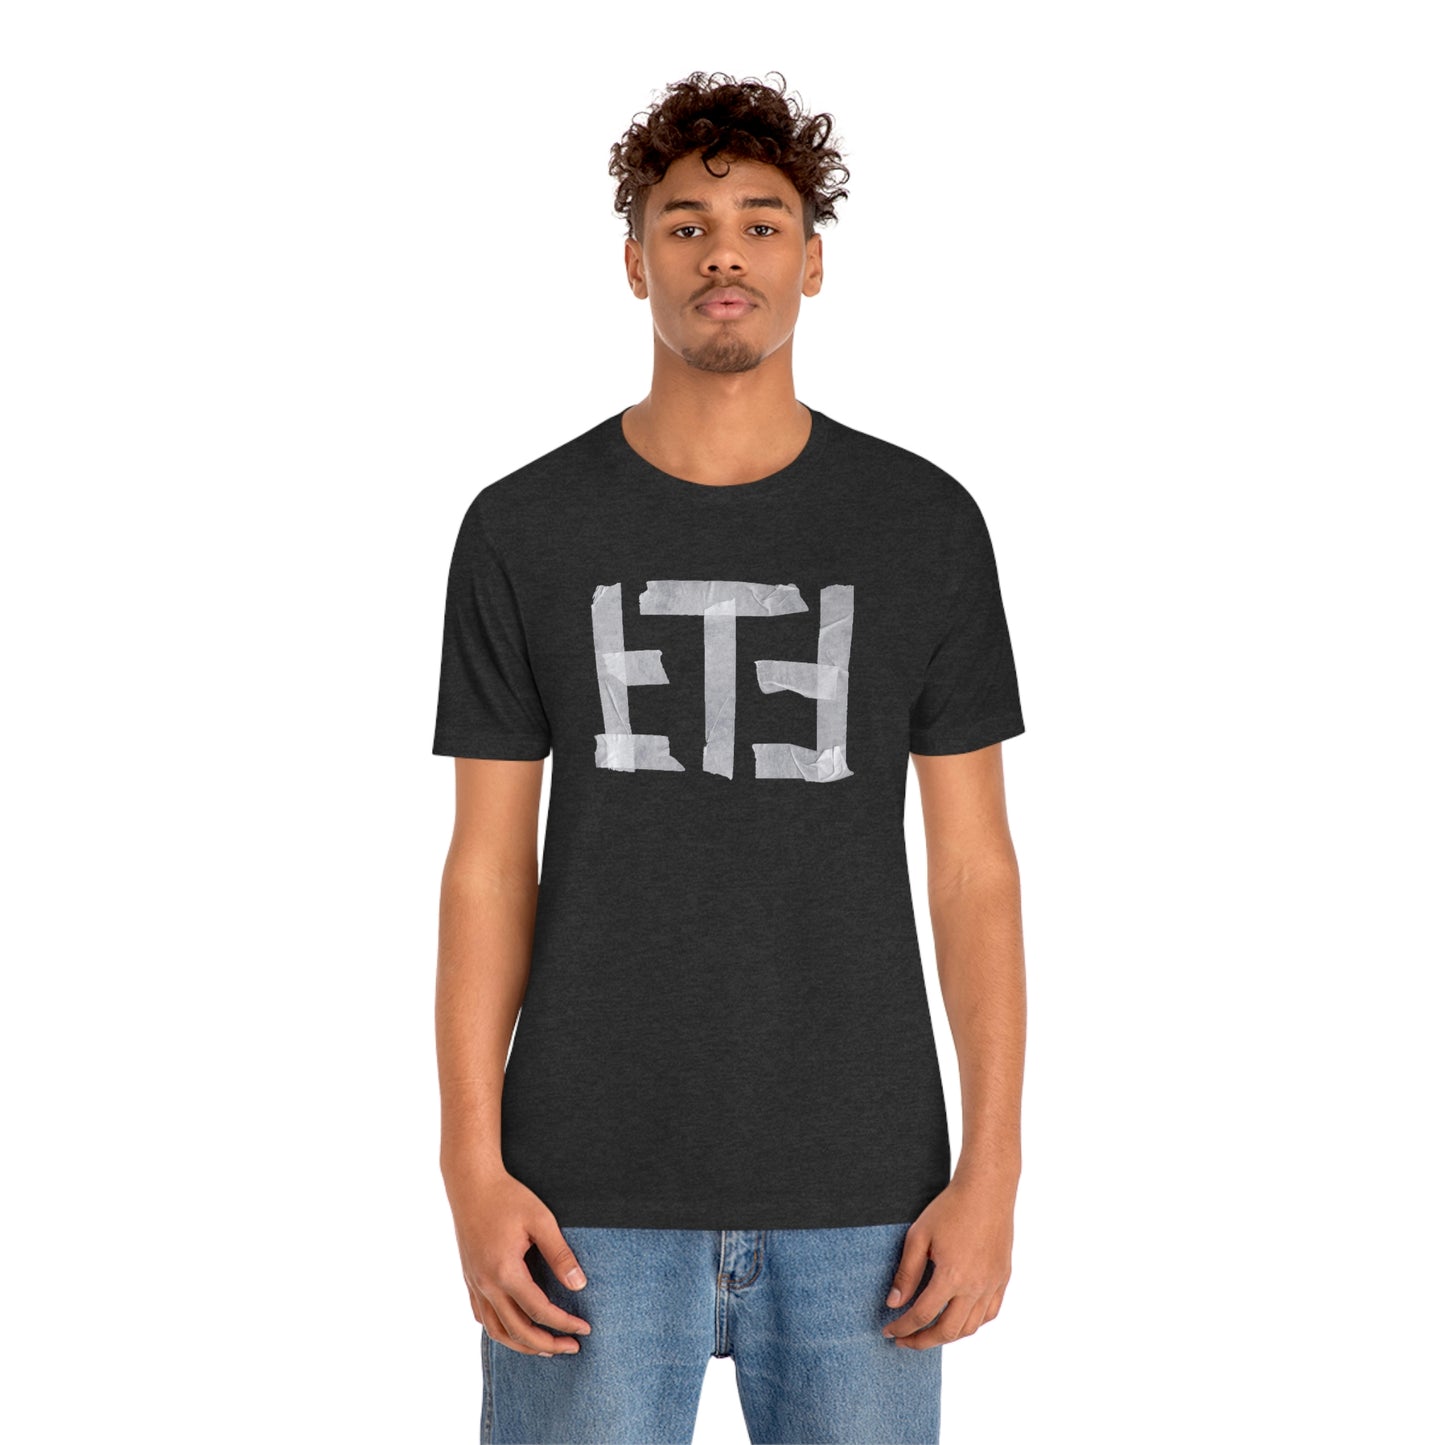 Tape Top Time Short Sleeve Tee